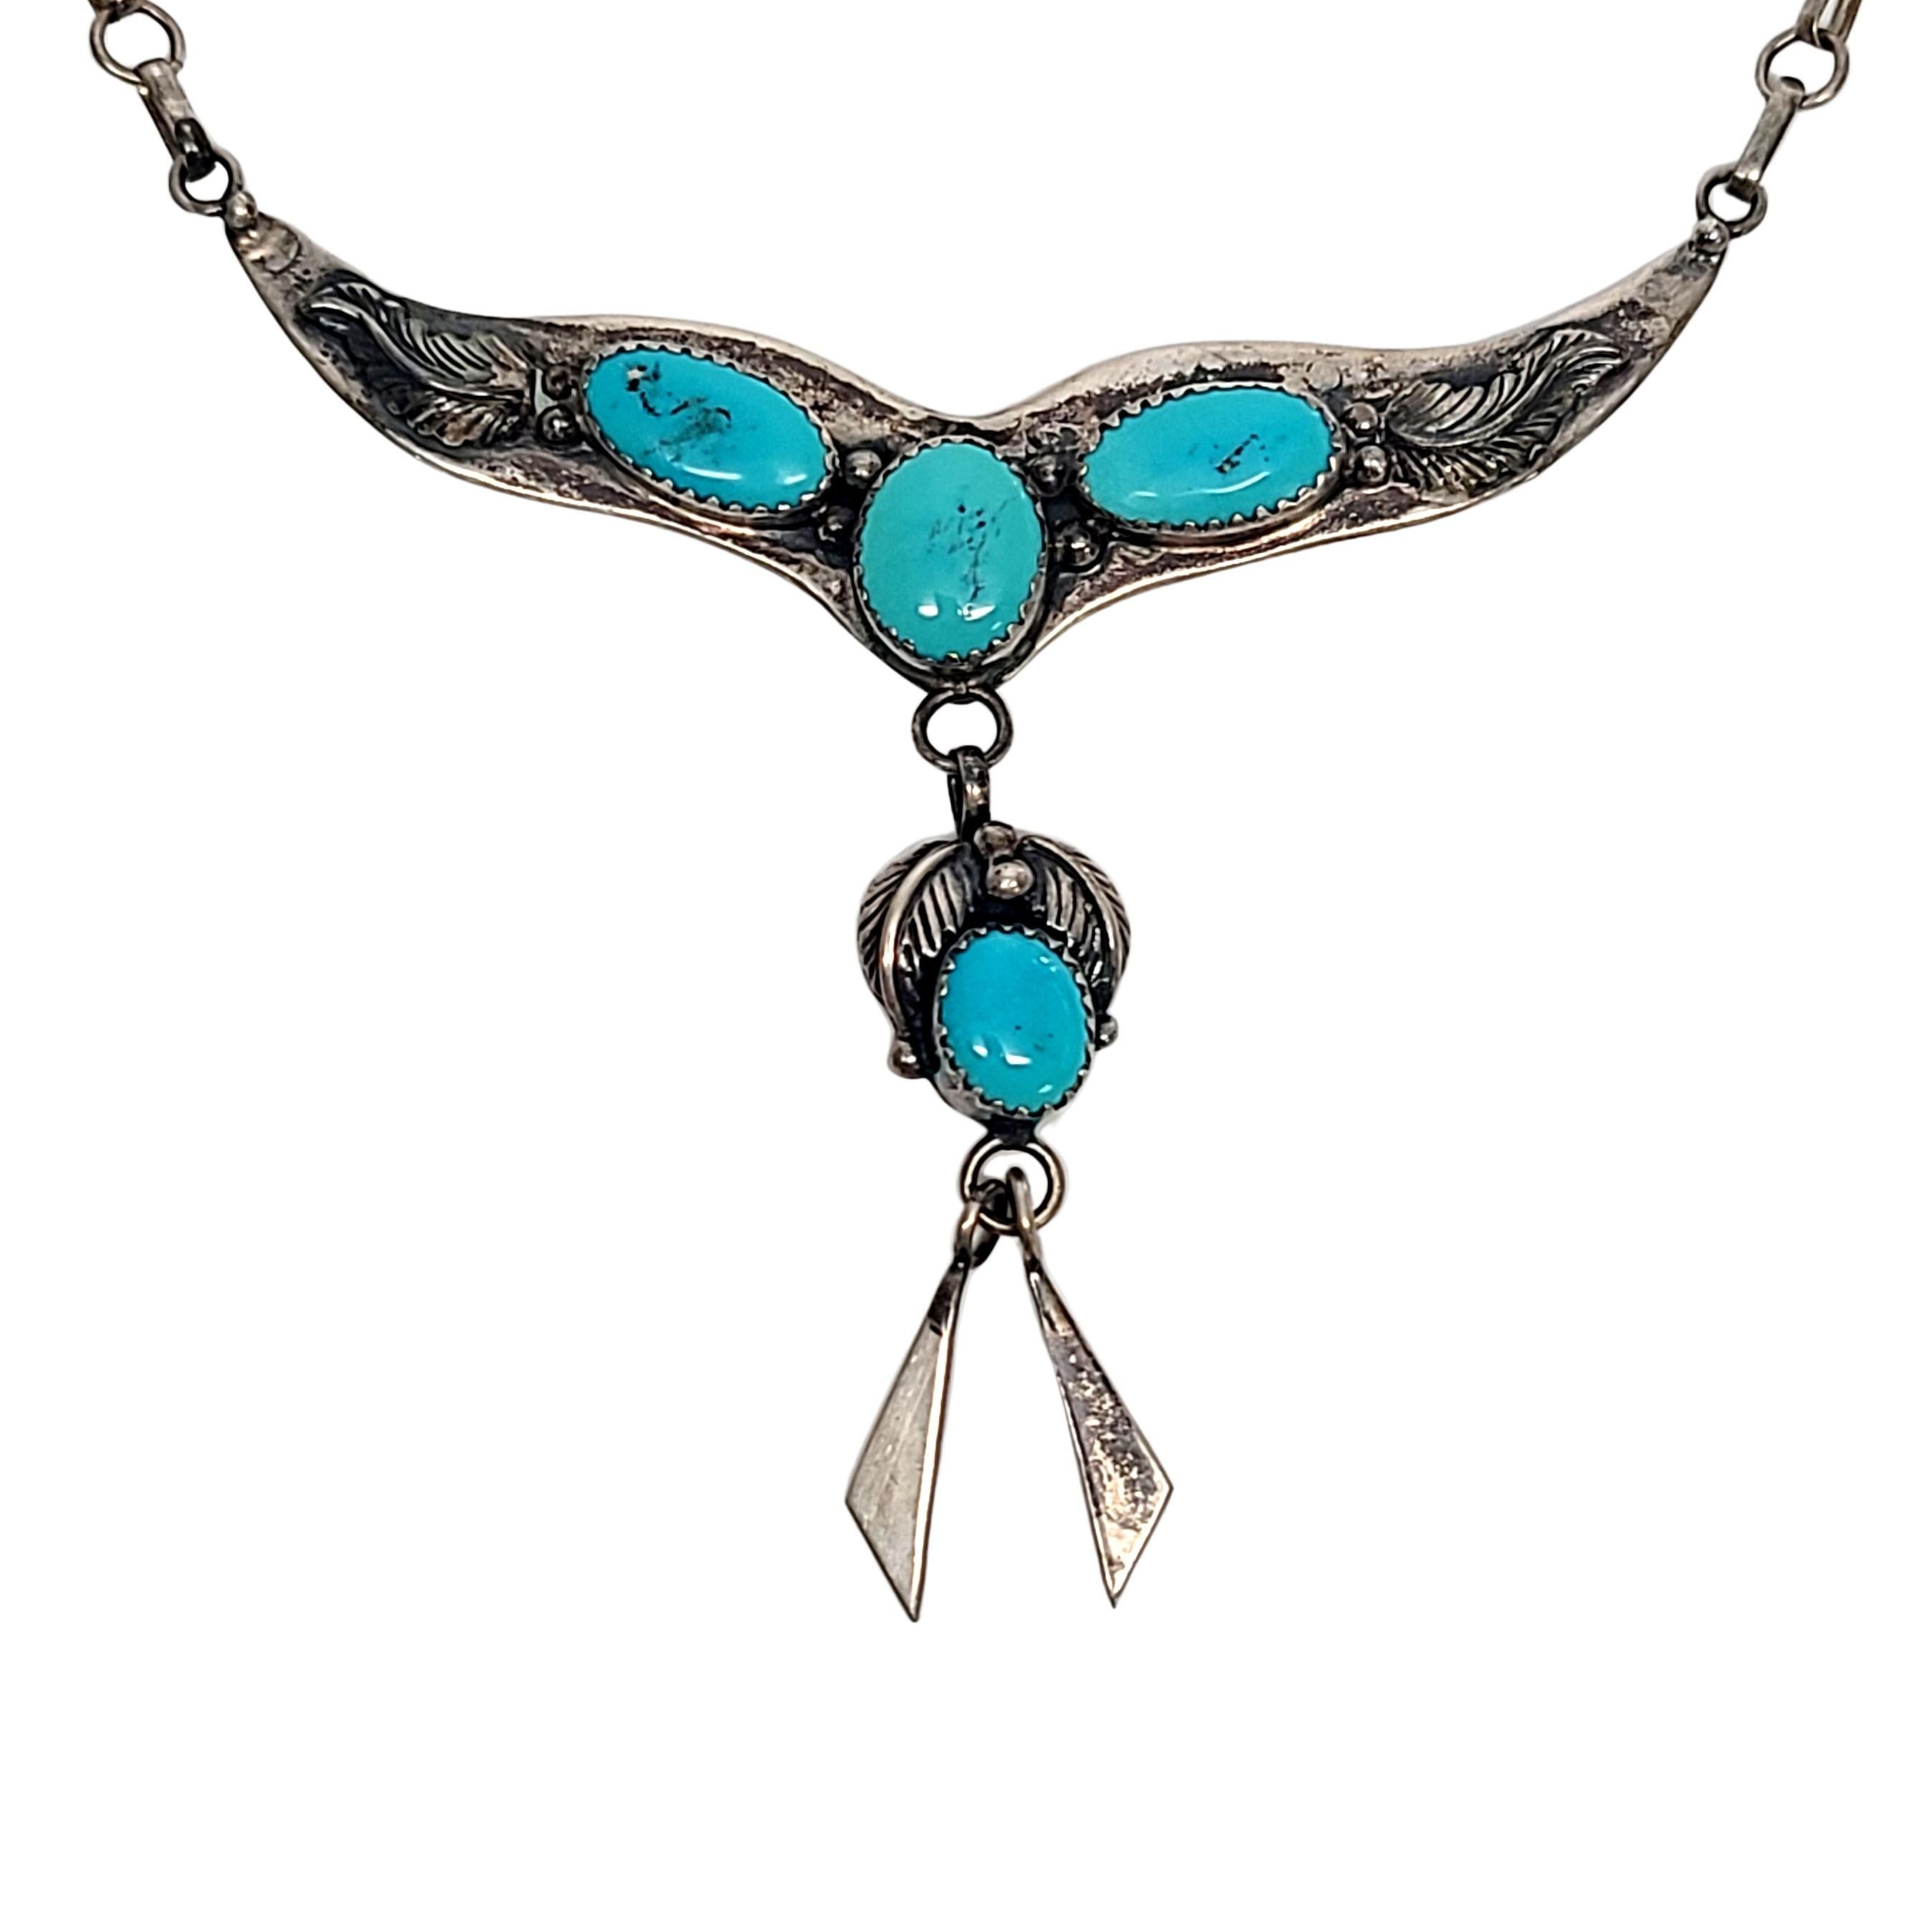 Sterling silver and turquoise necklace by Native American artisan Jack Whittacker.

Beautiful necklace featuring a drop pendant, feather details and saw tooth bezel set turquoise stones.

Measures approx 18  1/2